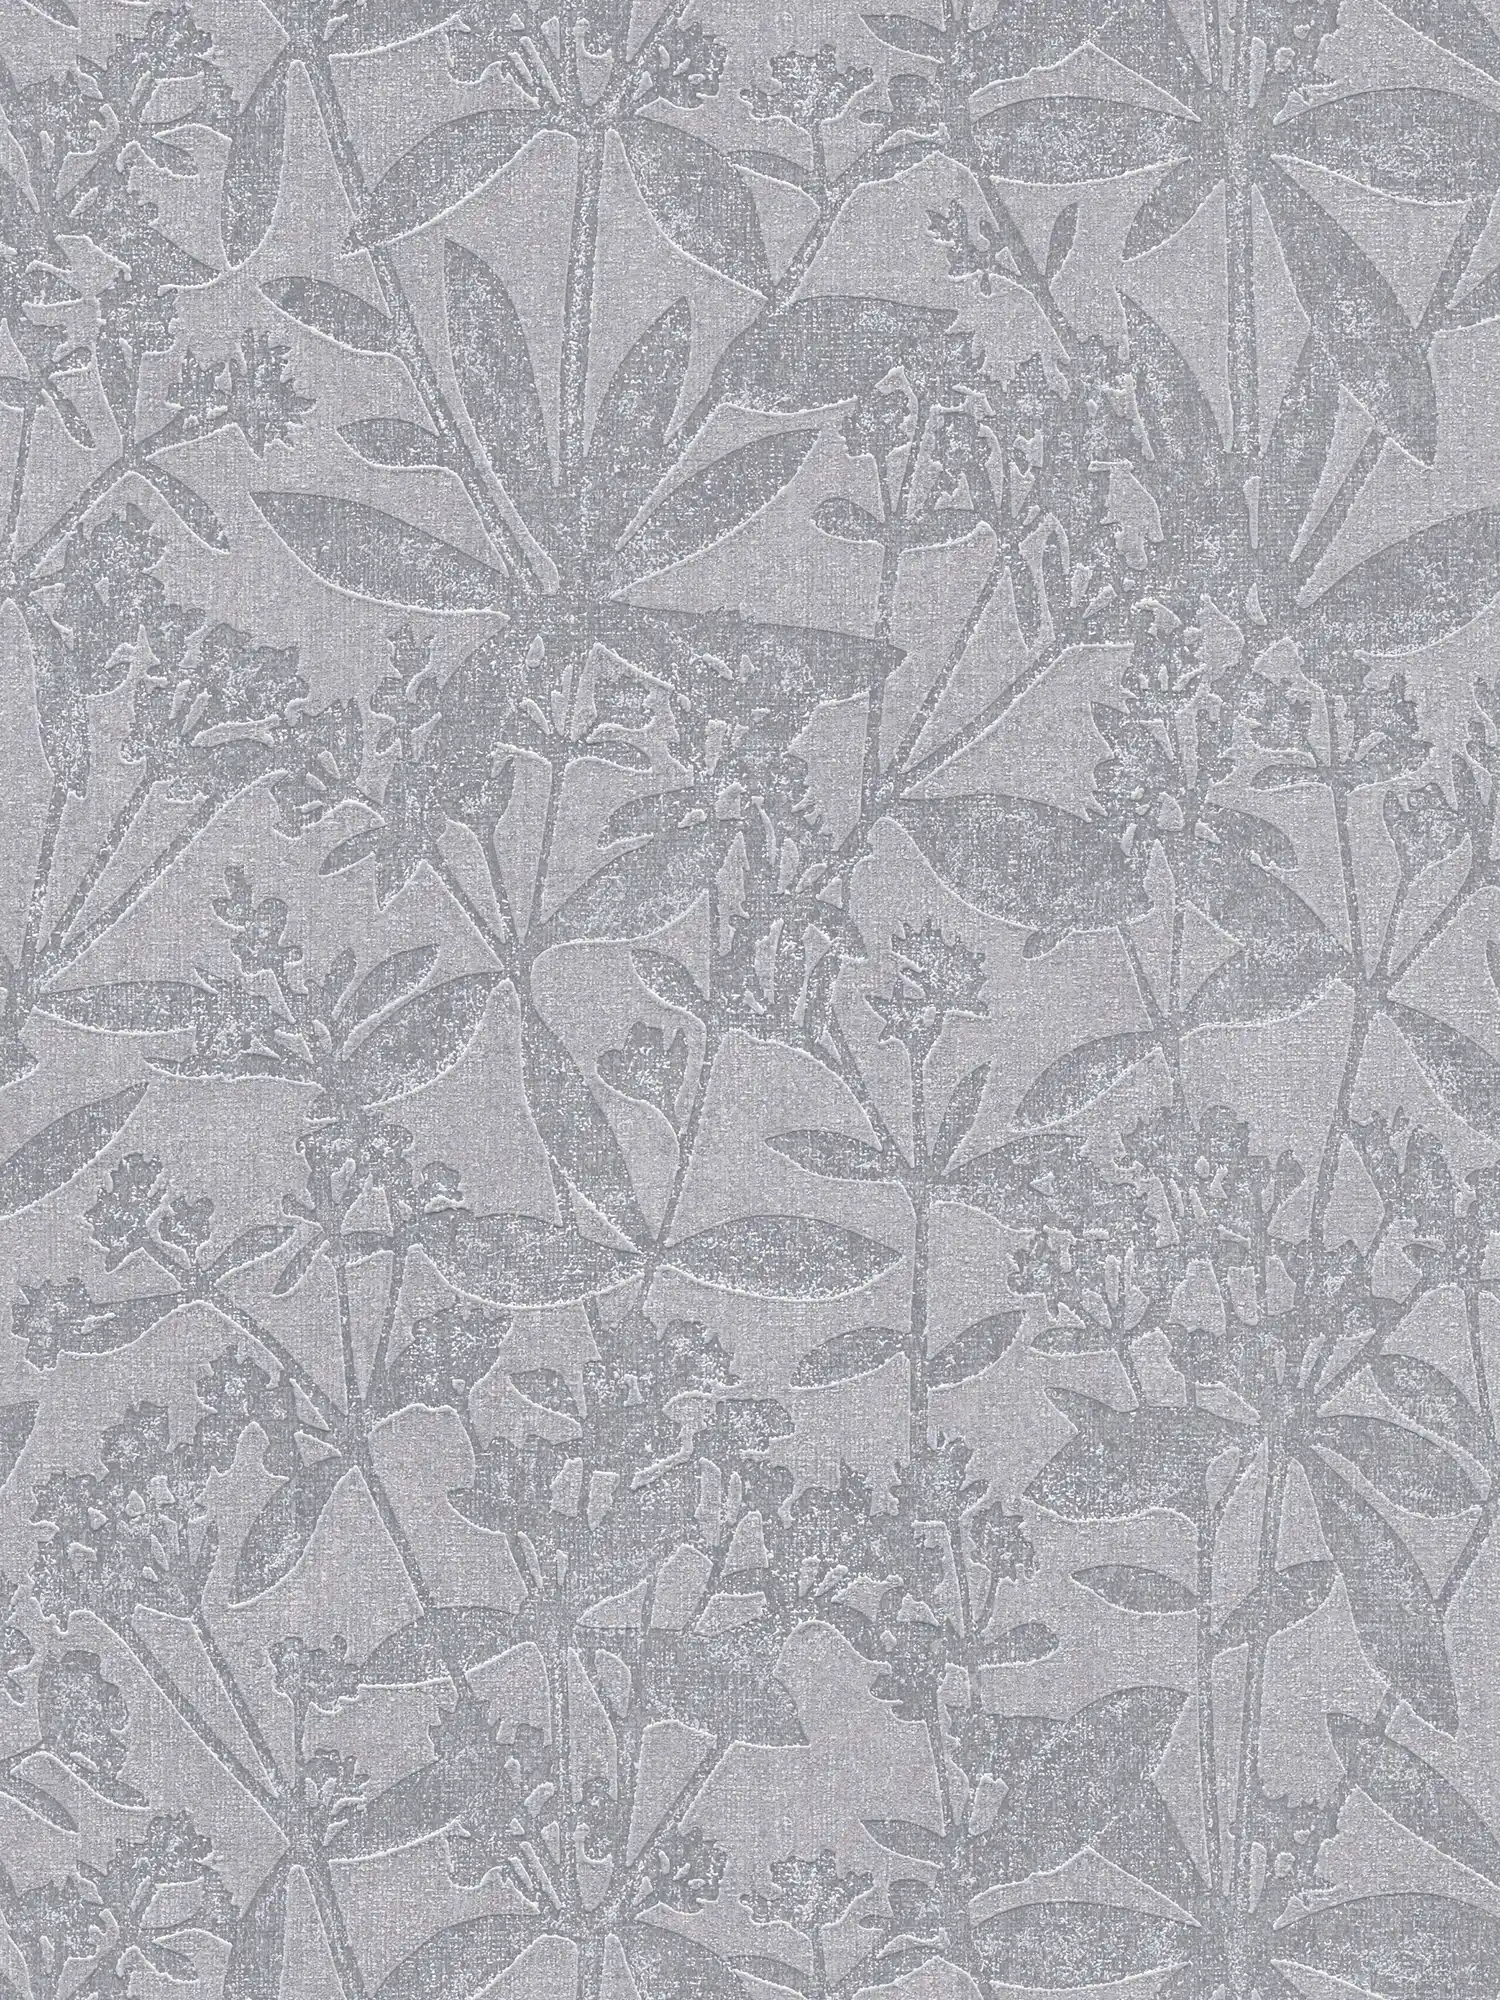         Floral non-woven wallpaper with floral textured pattern - grey, blue
    